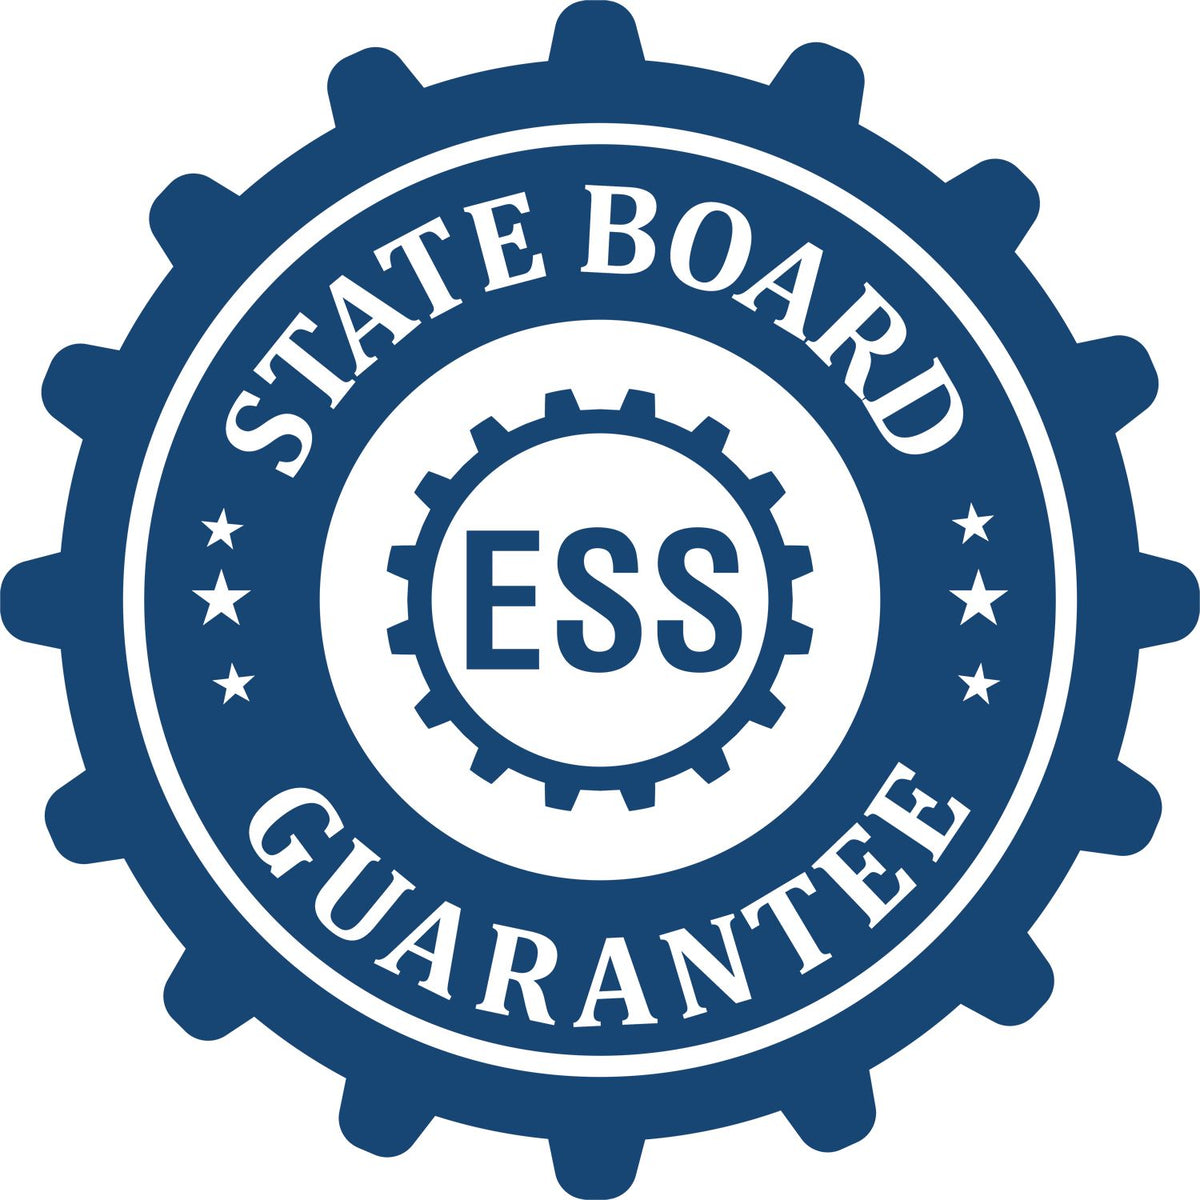 An emblem in a gear shape illustrating a state board guarantee for the Gift Hawaii Landscape Architect Seal